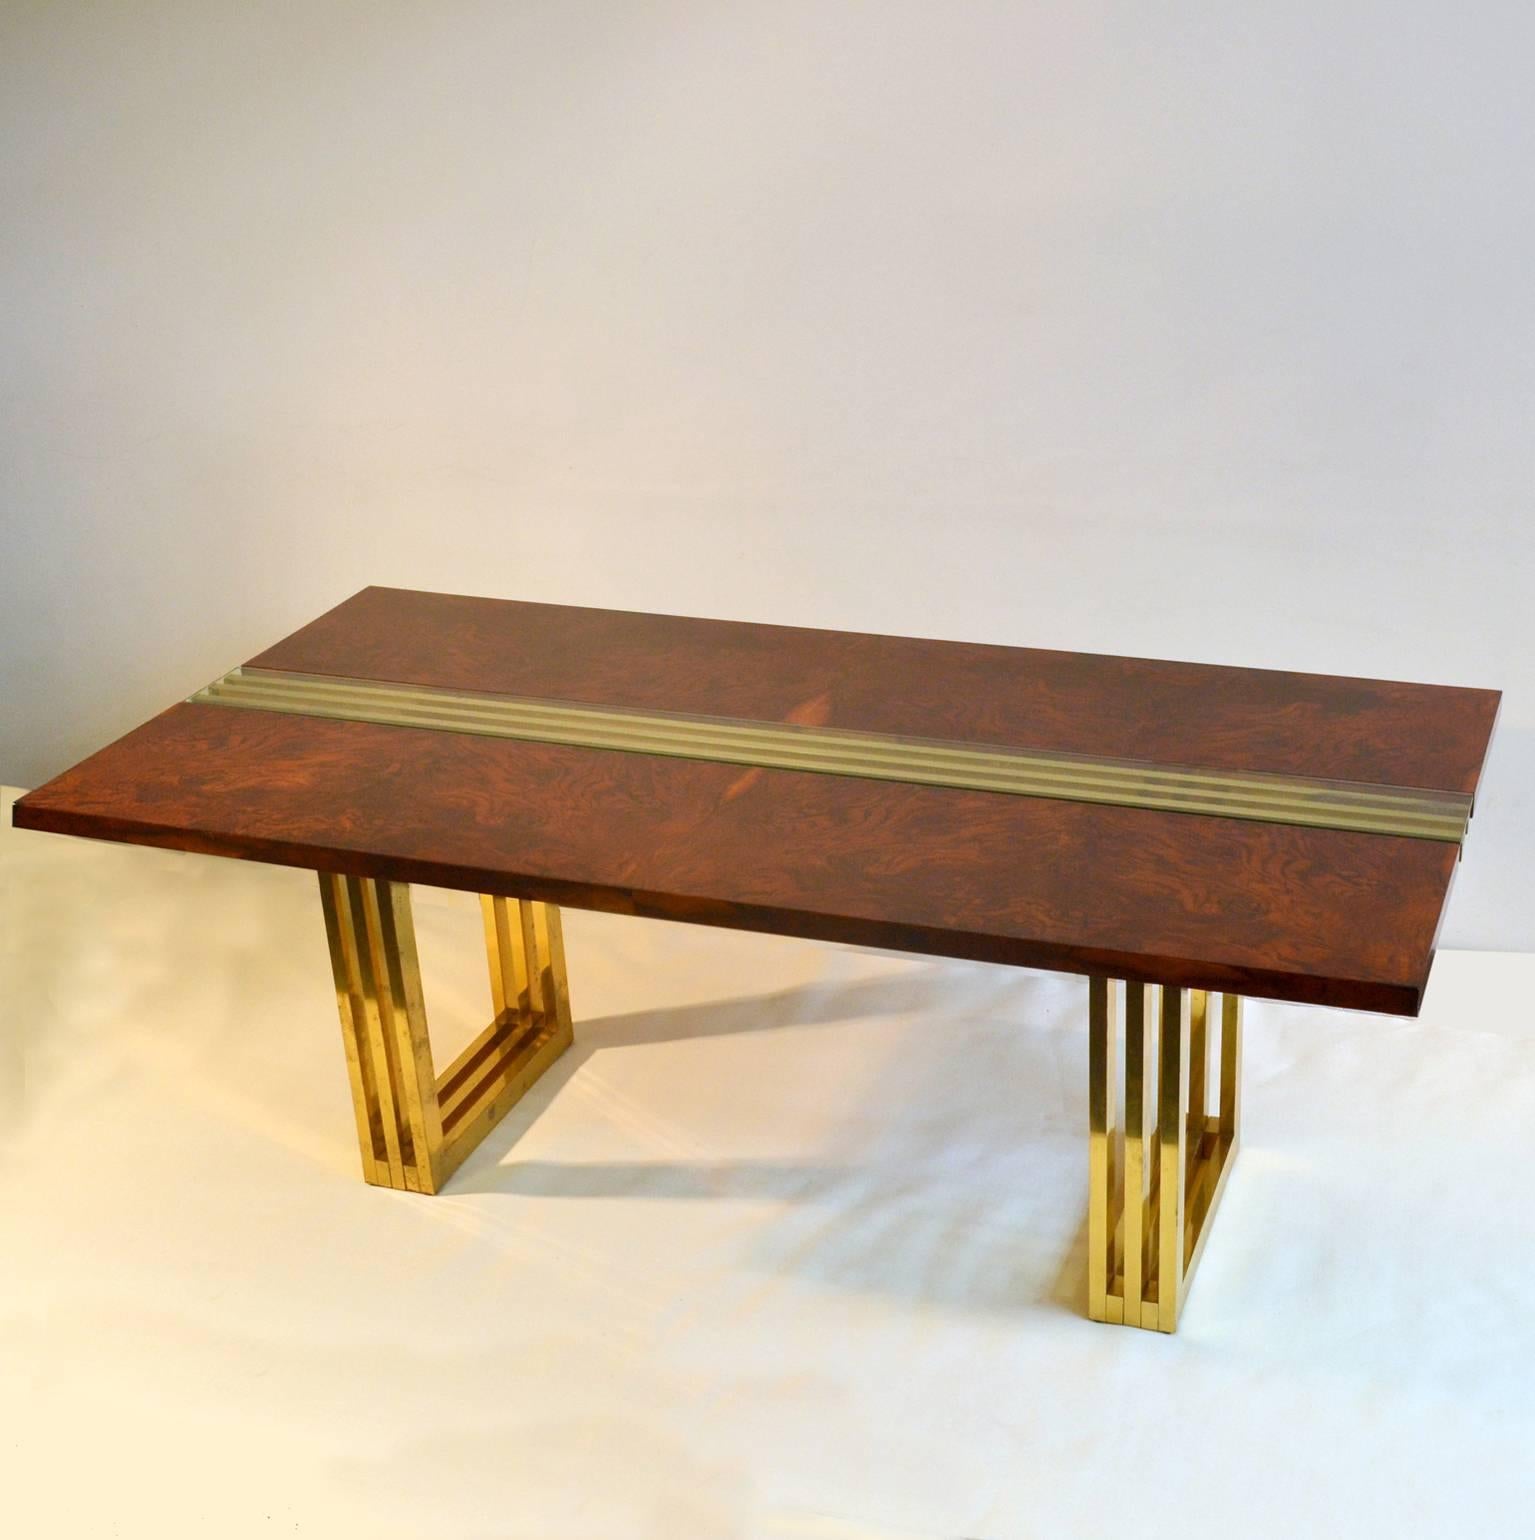 The top of the two meter long dining table is made of two leaves side by side in burl walnut with a middle panel of glass which enable us to see the construction of brass. Geometric rhythm of square brass tubes form the construction of this table